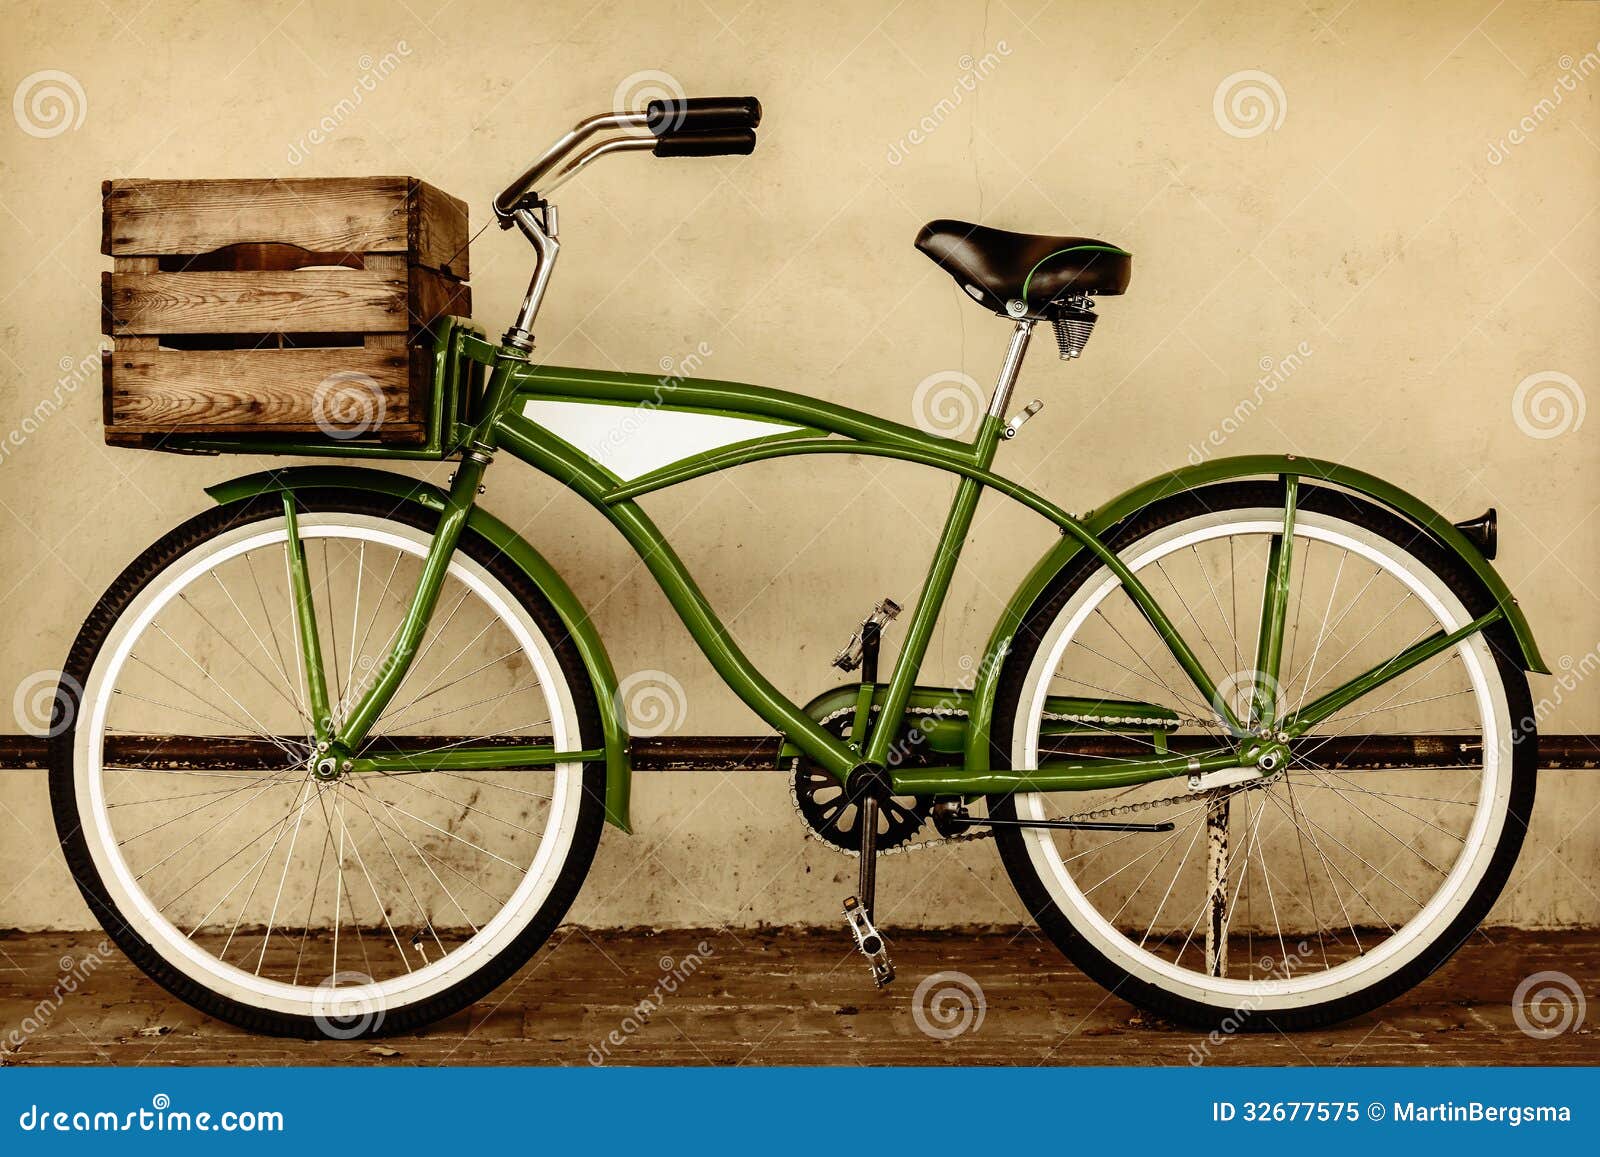 Retro Styled Sepia Image Of A Vintage Bicycle With Wooden 